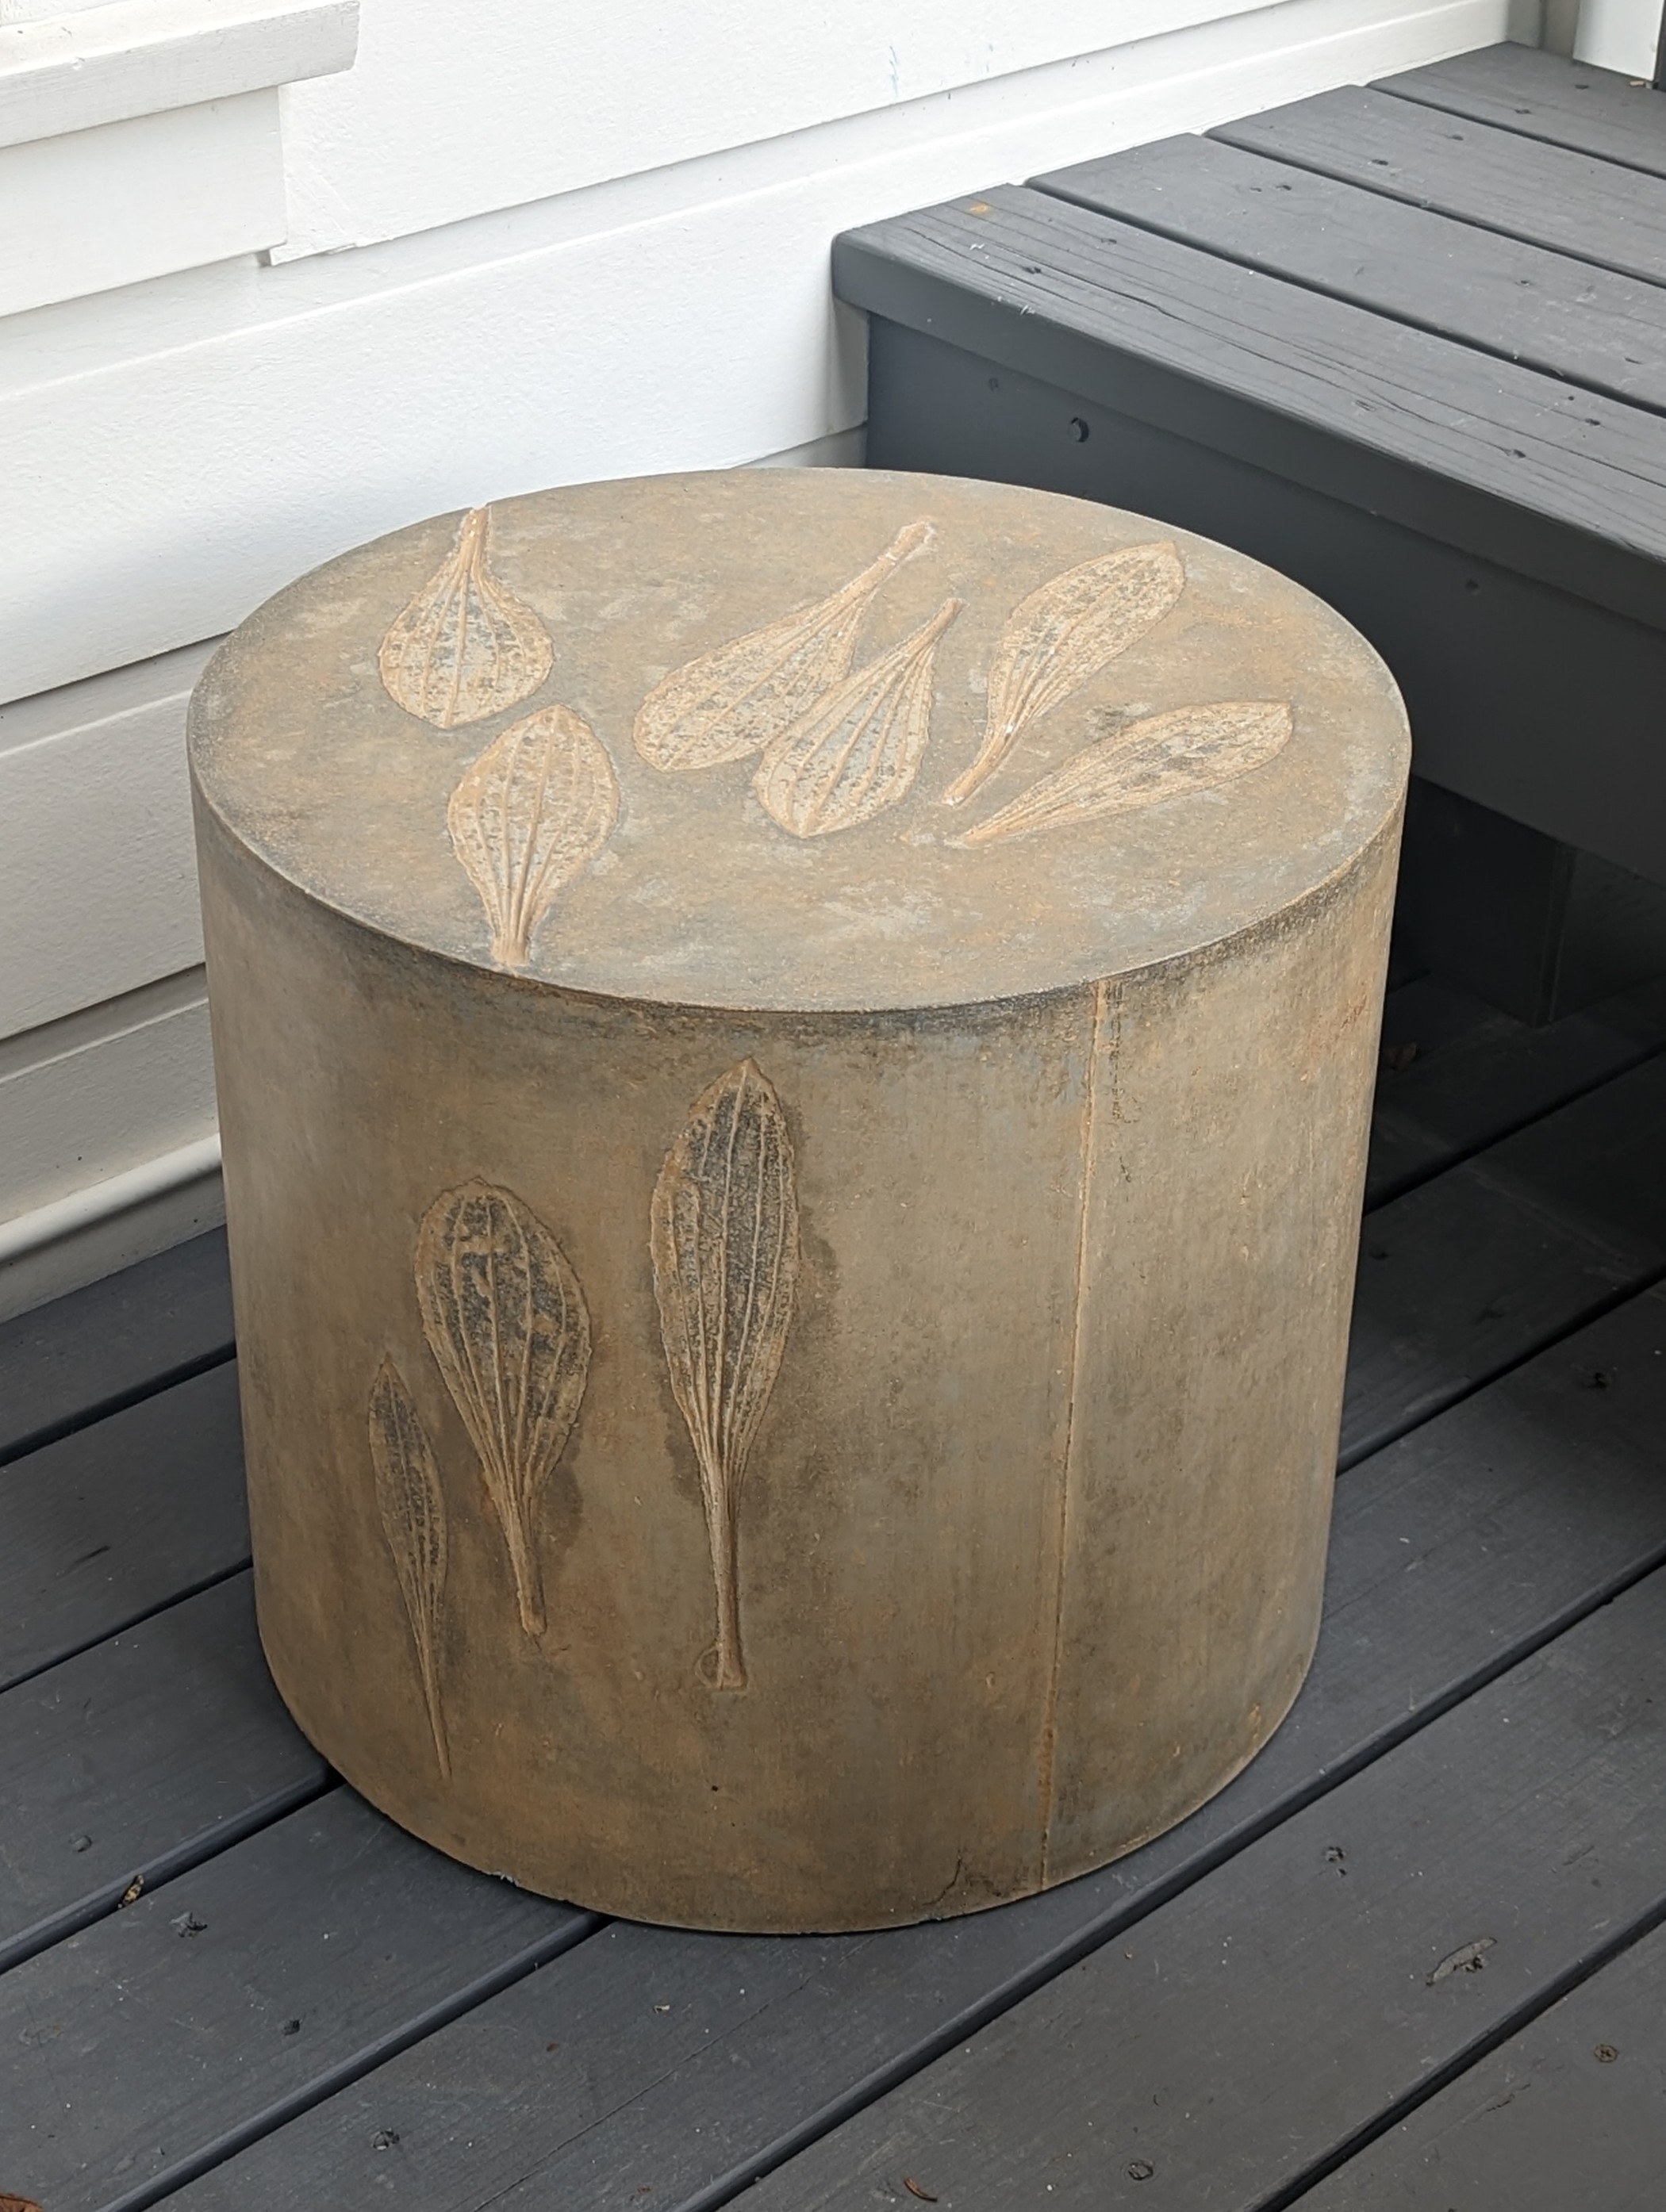 Brown and gold concrete cylindrical coffee table with plantain leaf impressions